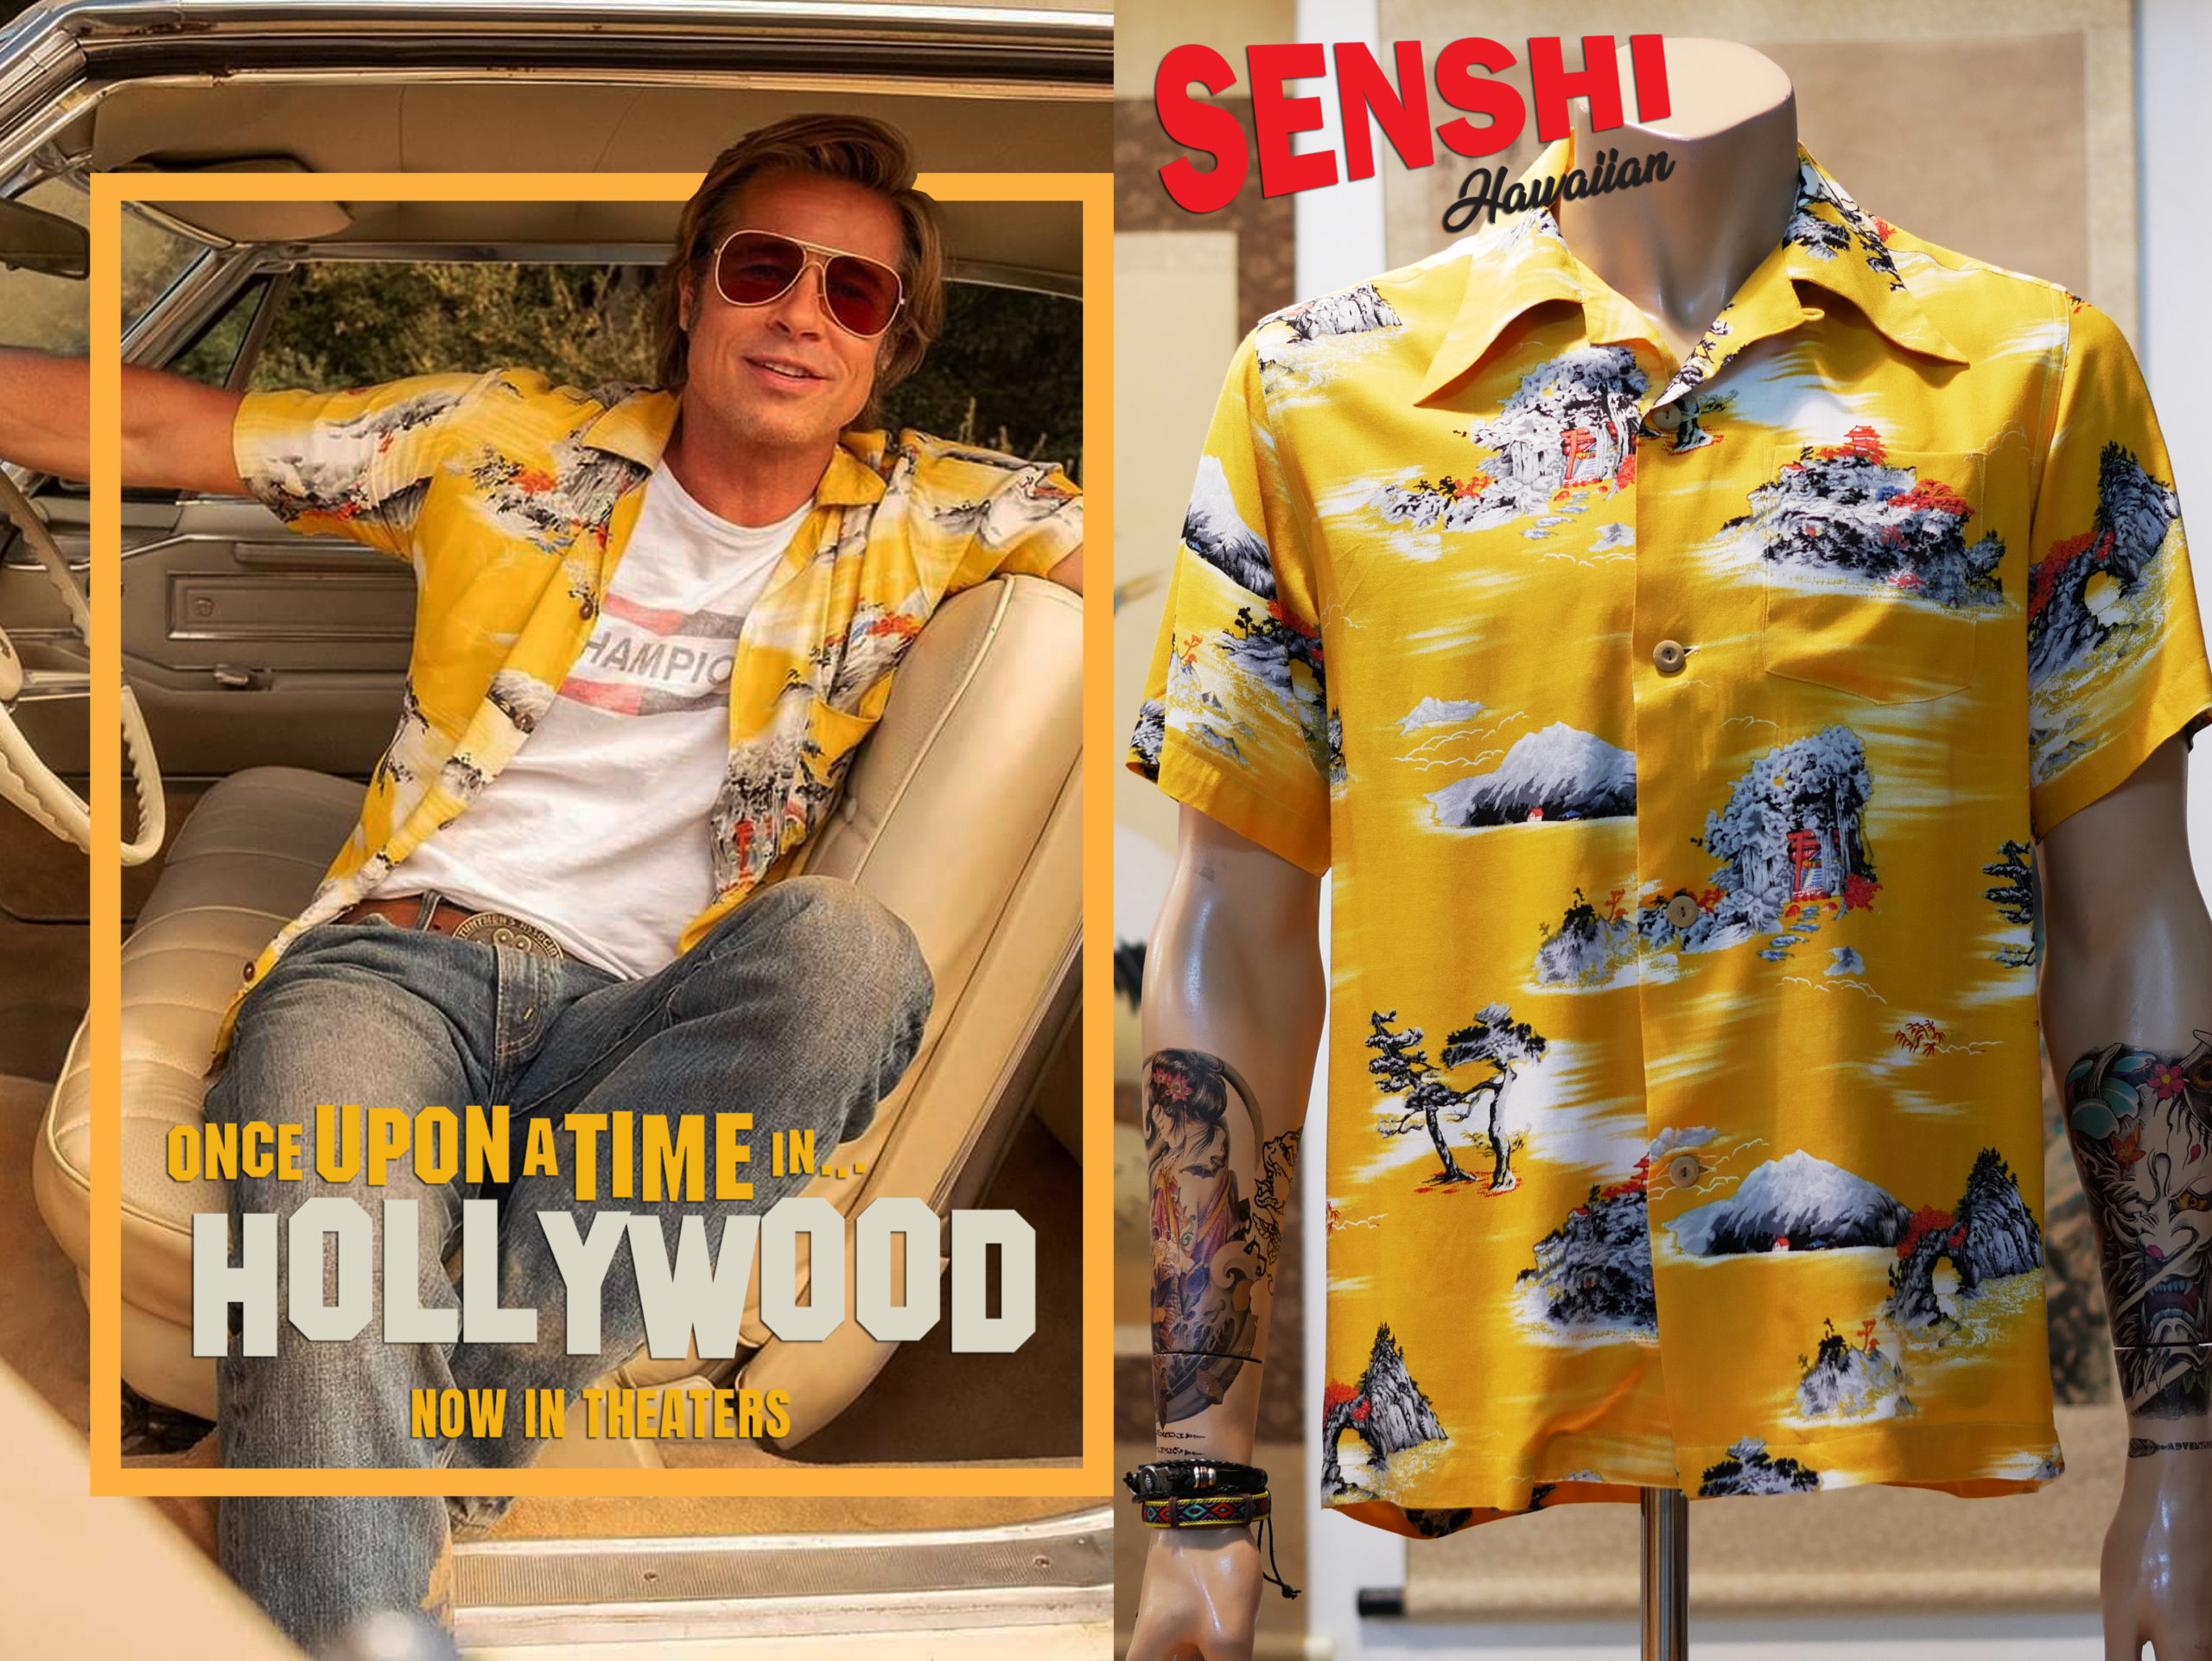 Hawaiian Shirt Brad Pitt yellow Cliff Booth In Once Up on a Time in  Hollywood